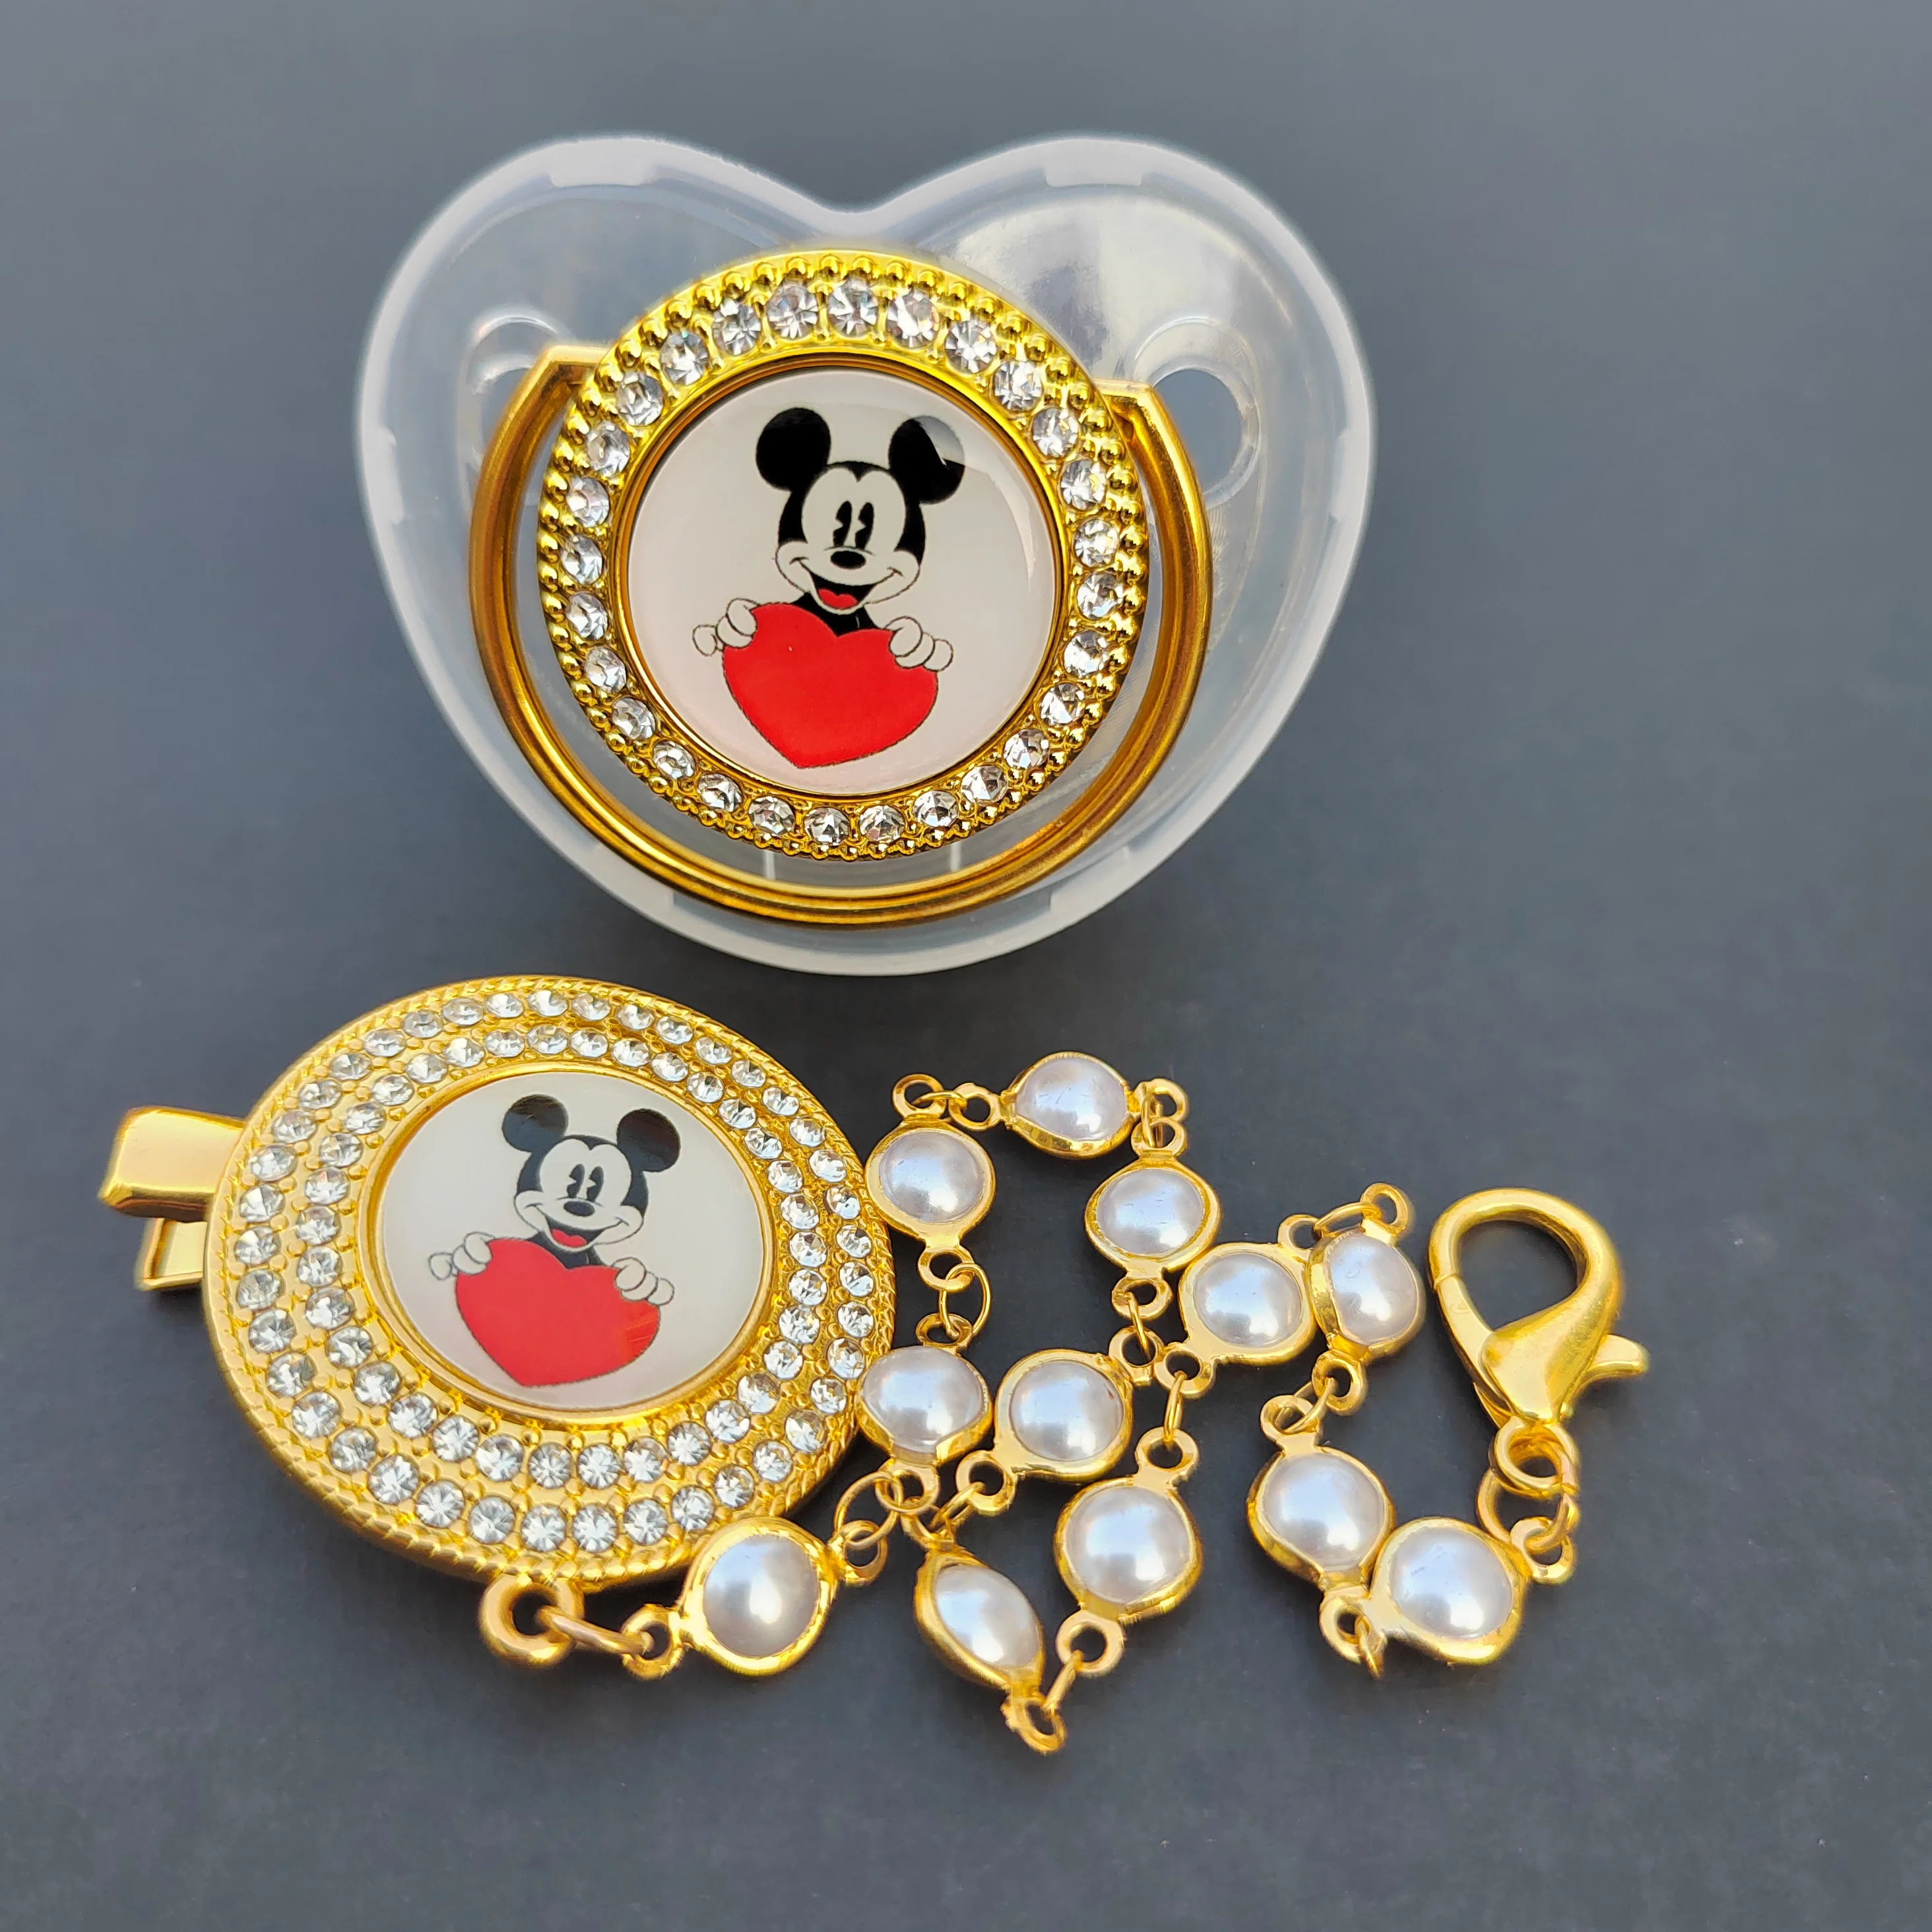 

Disney Deluxe Baby Pacifier with Pearl Chain Clip Newborn Mickey Mouse Heart 7 Colors BPA Free Bling Fake Pacifier Chupete 0-24M